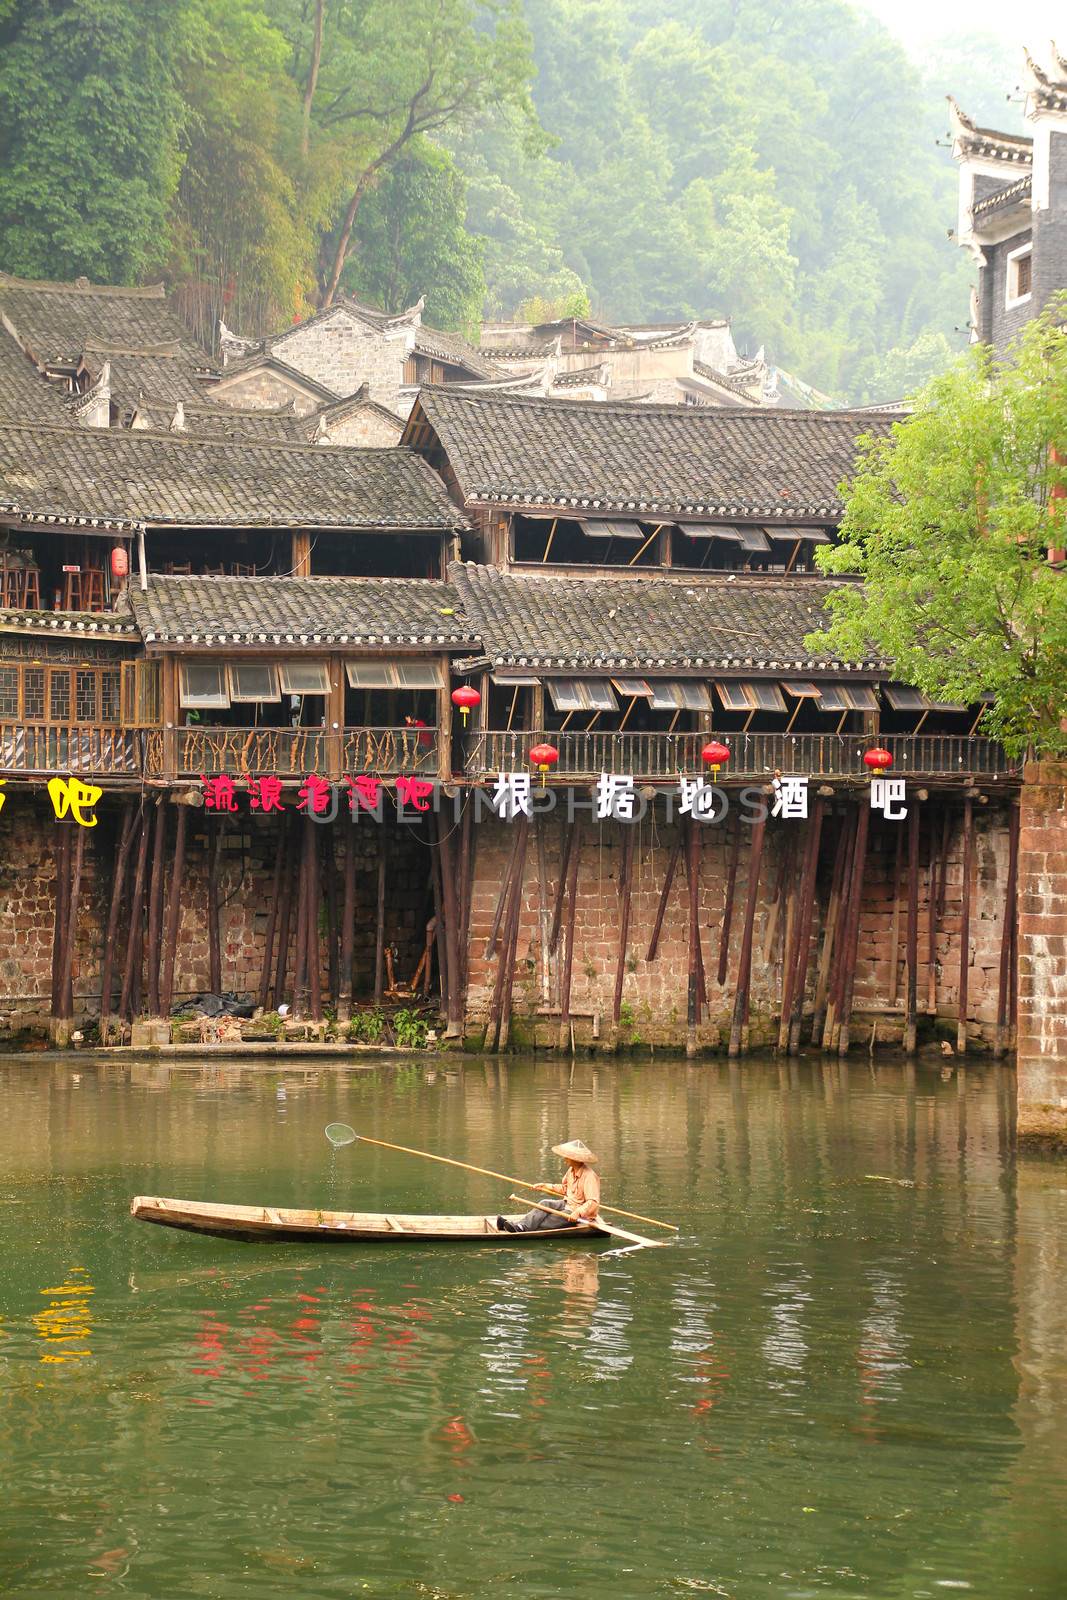 Fenghuang ancient town in China by kawing921